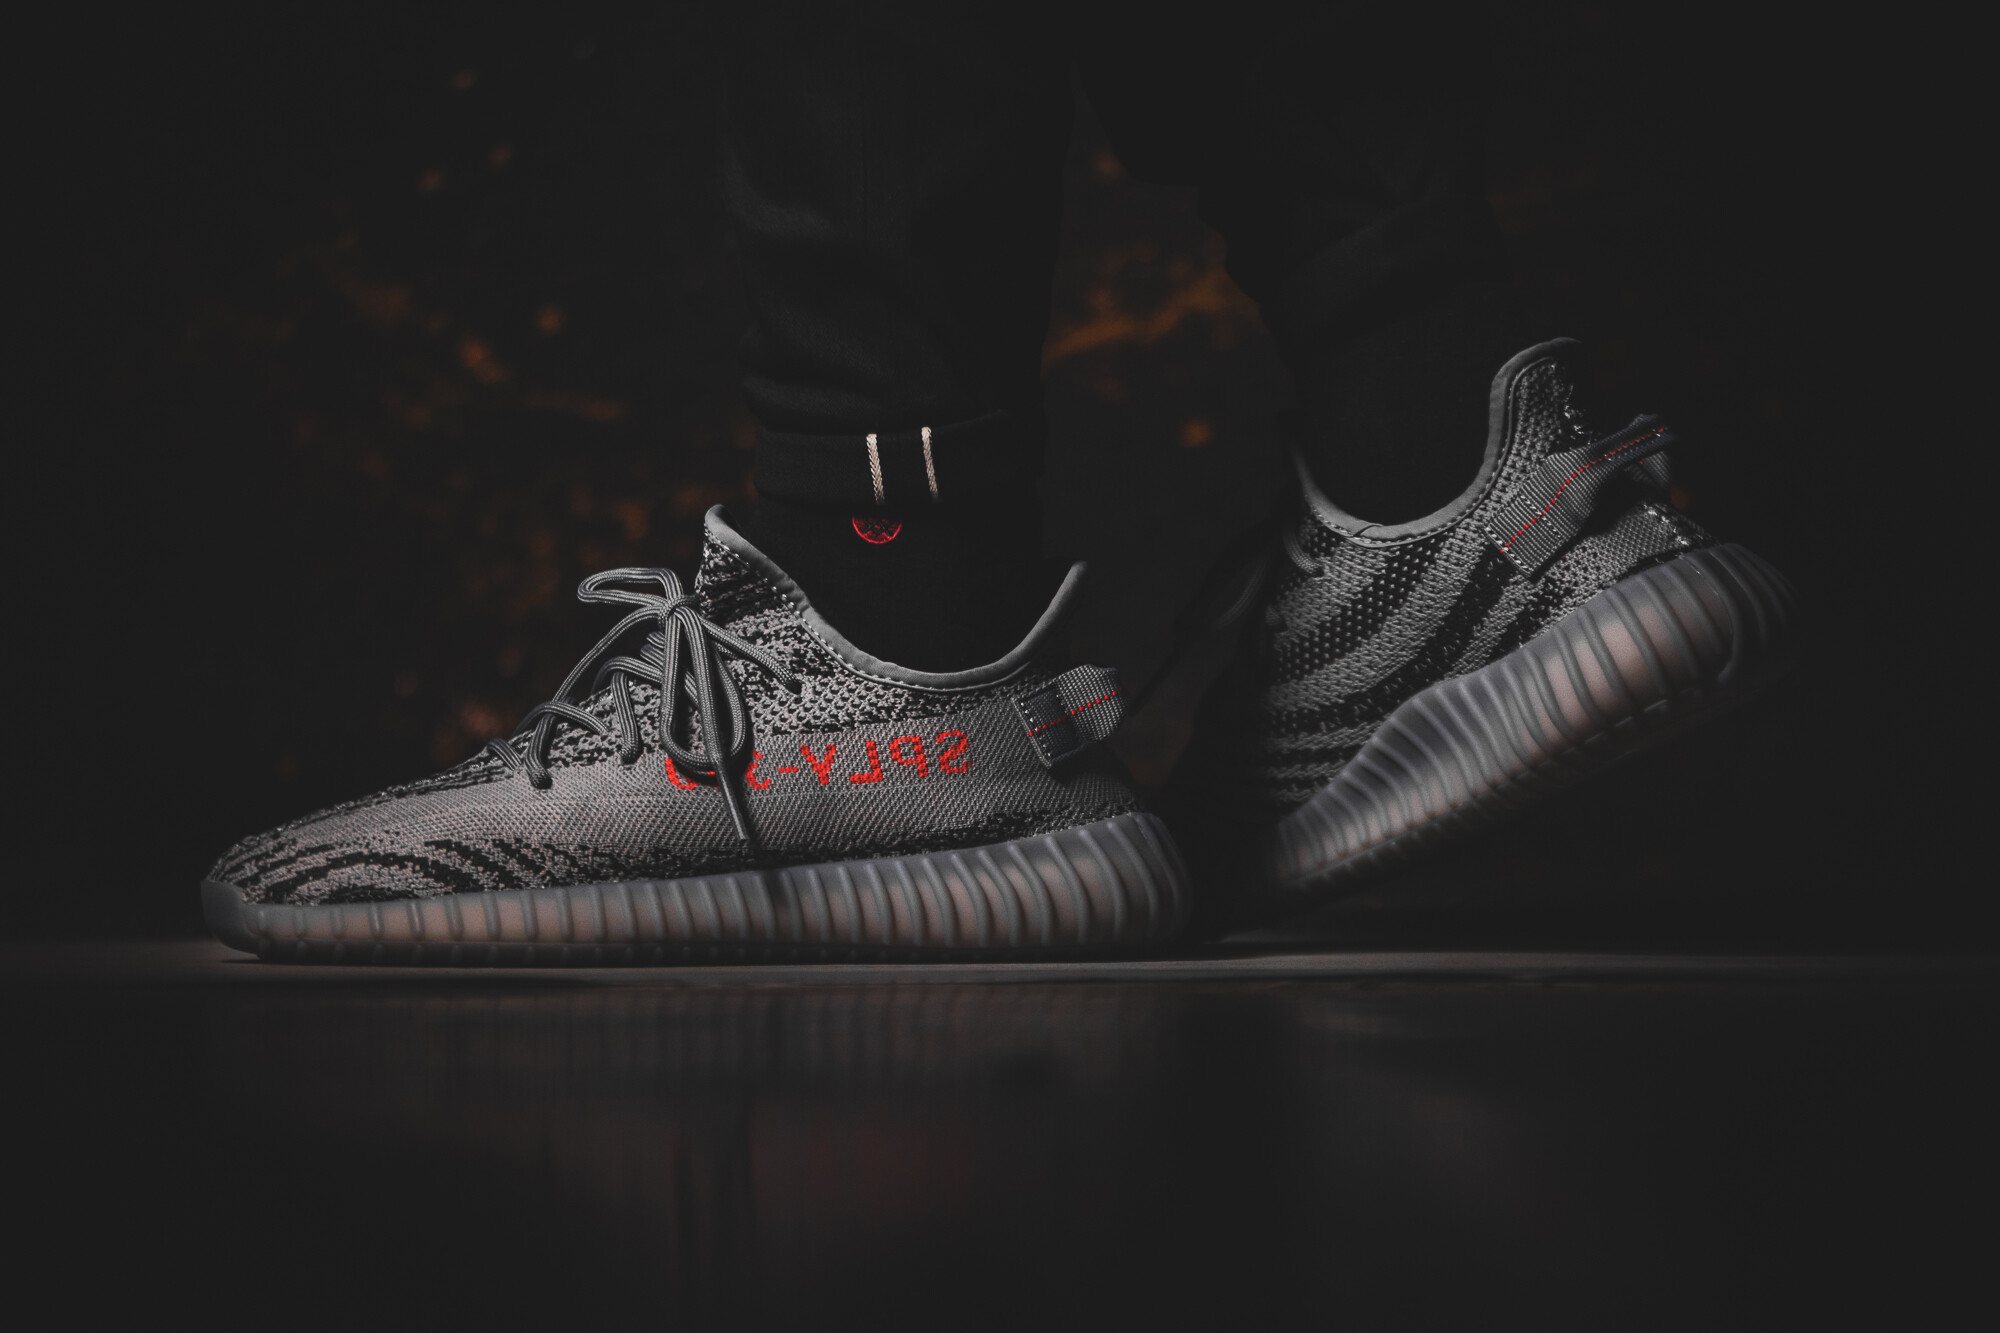 Yeezy: Boost 350 V2, The Adidas Powerphase Calabasas was released on March 28, 2017. 2000x1340 HD Background.